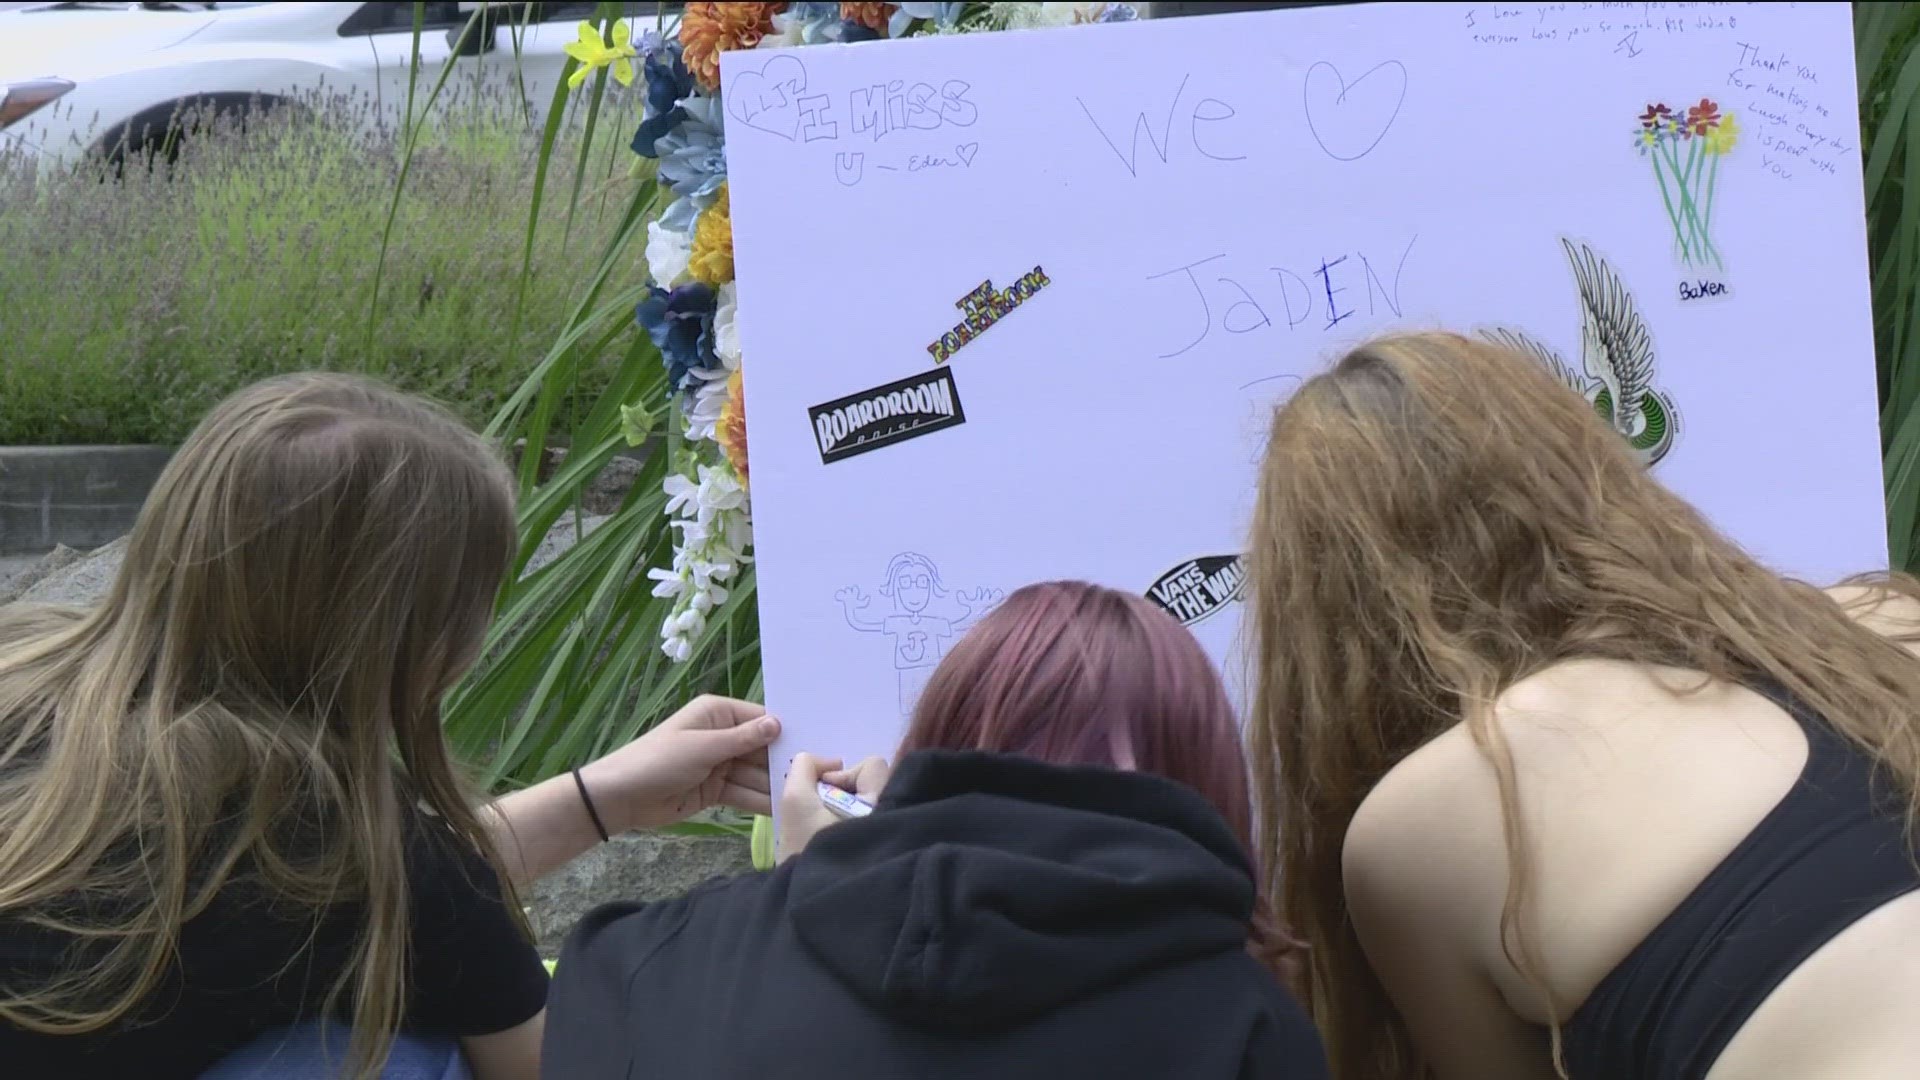 Teens that knew him put up posters, left flowers and notes for their dear friend at the location of the accident, in hopes to keep his memory alive.